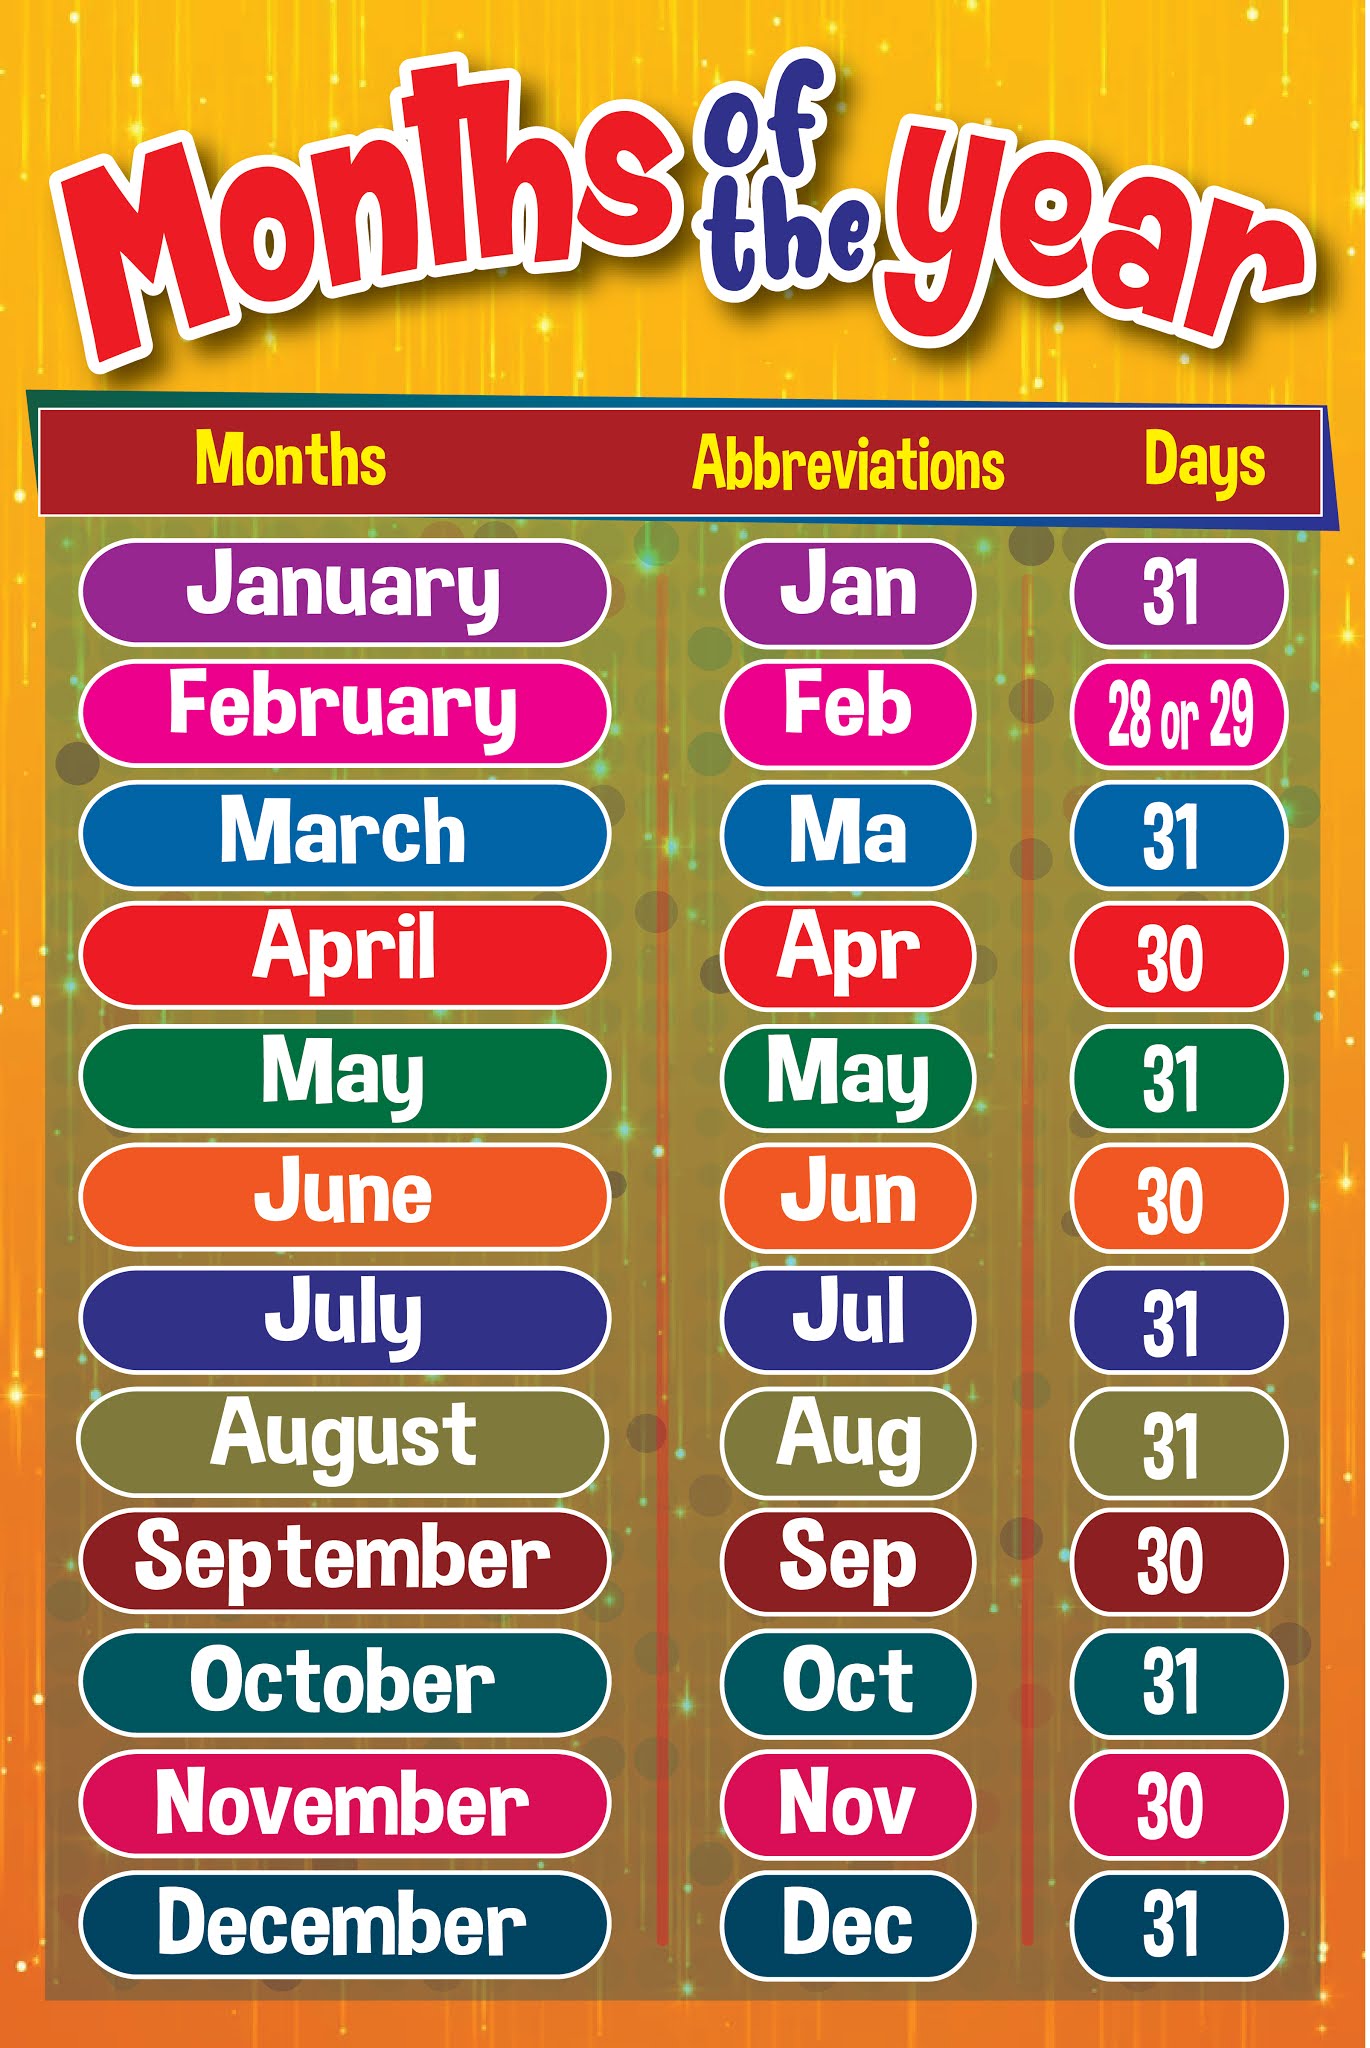 Months What Are The 12 Months Of The Year - Riset